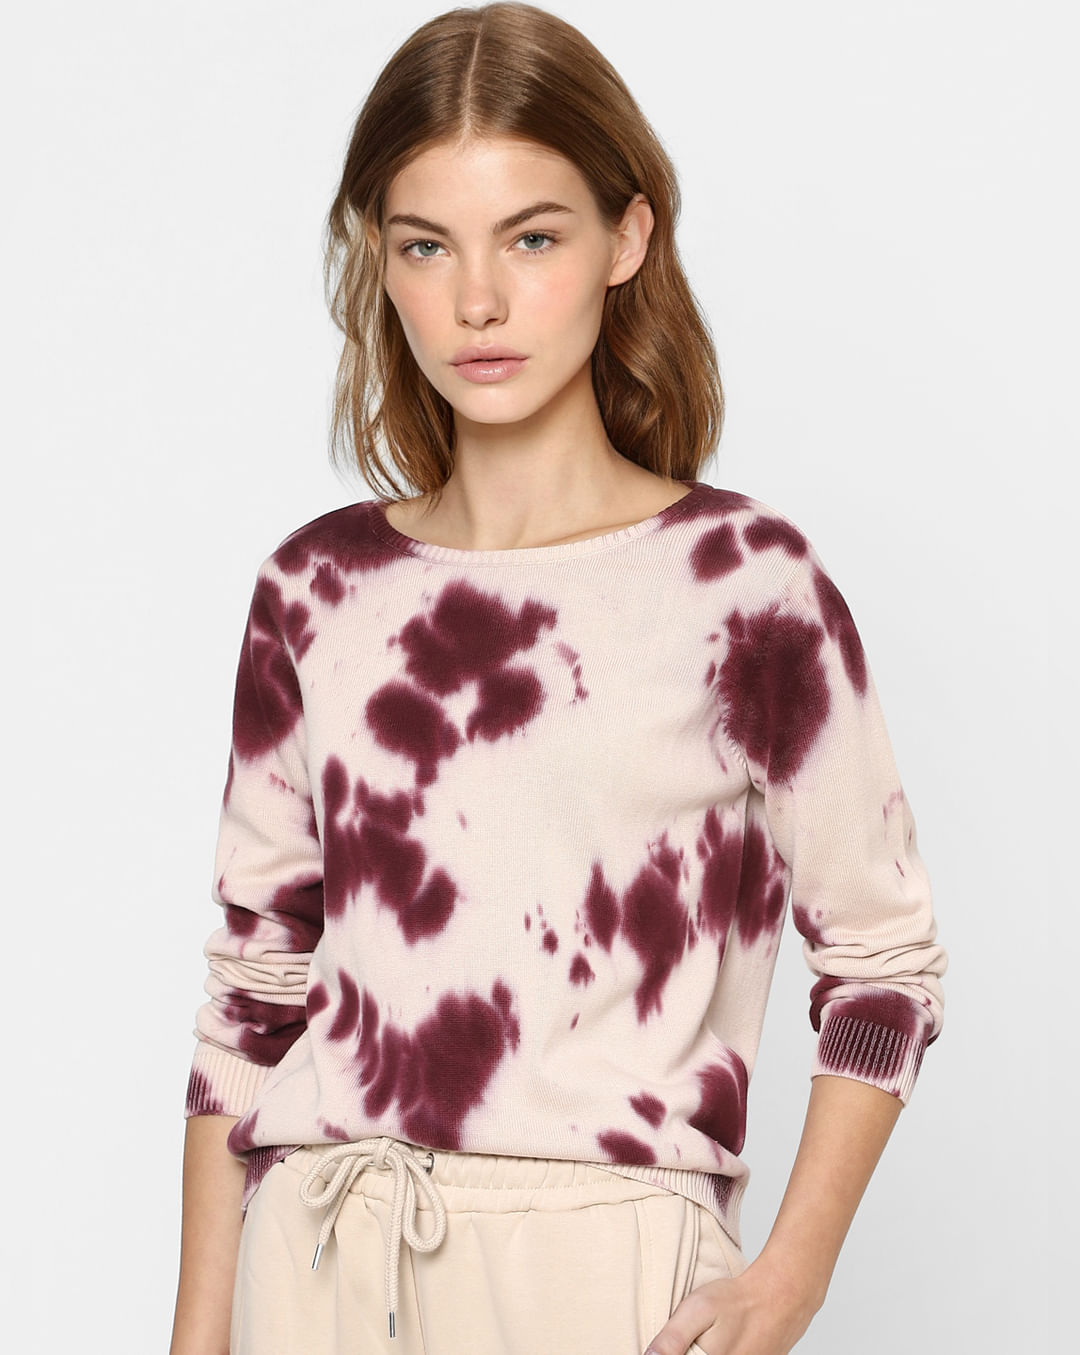 Buy Pink Tie Dye Knit Pullover for Women, ONLY